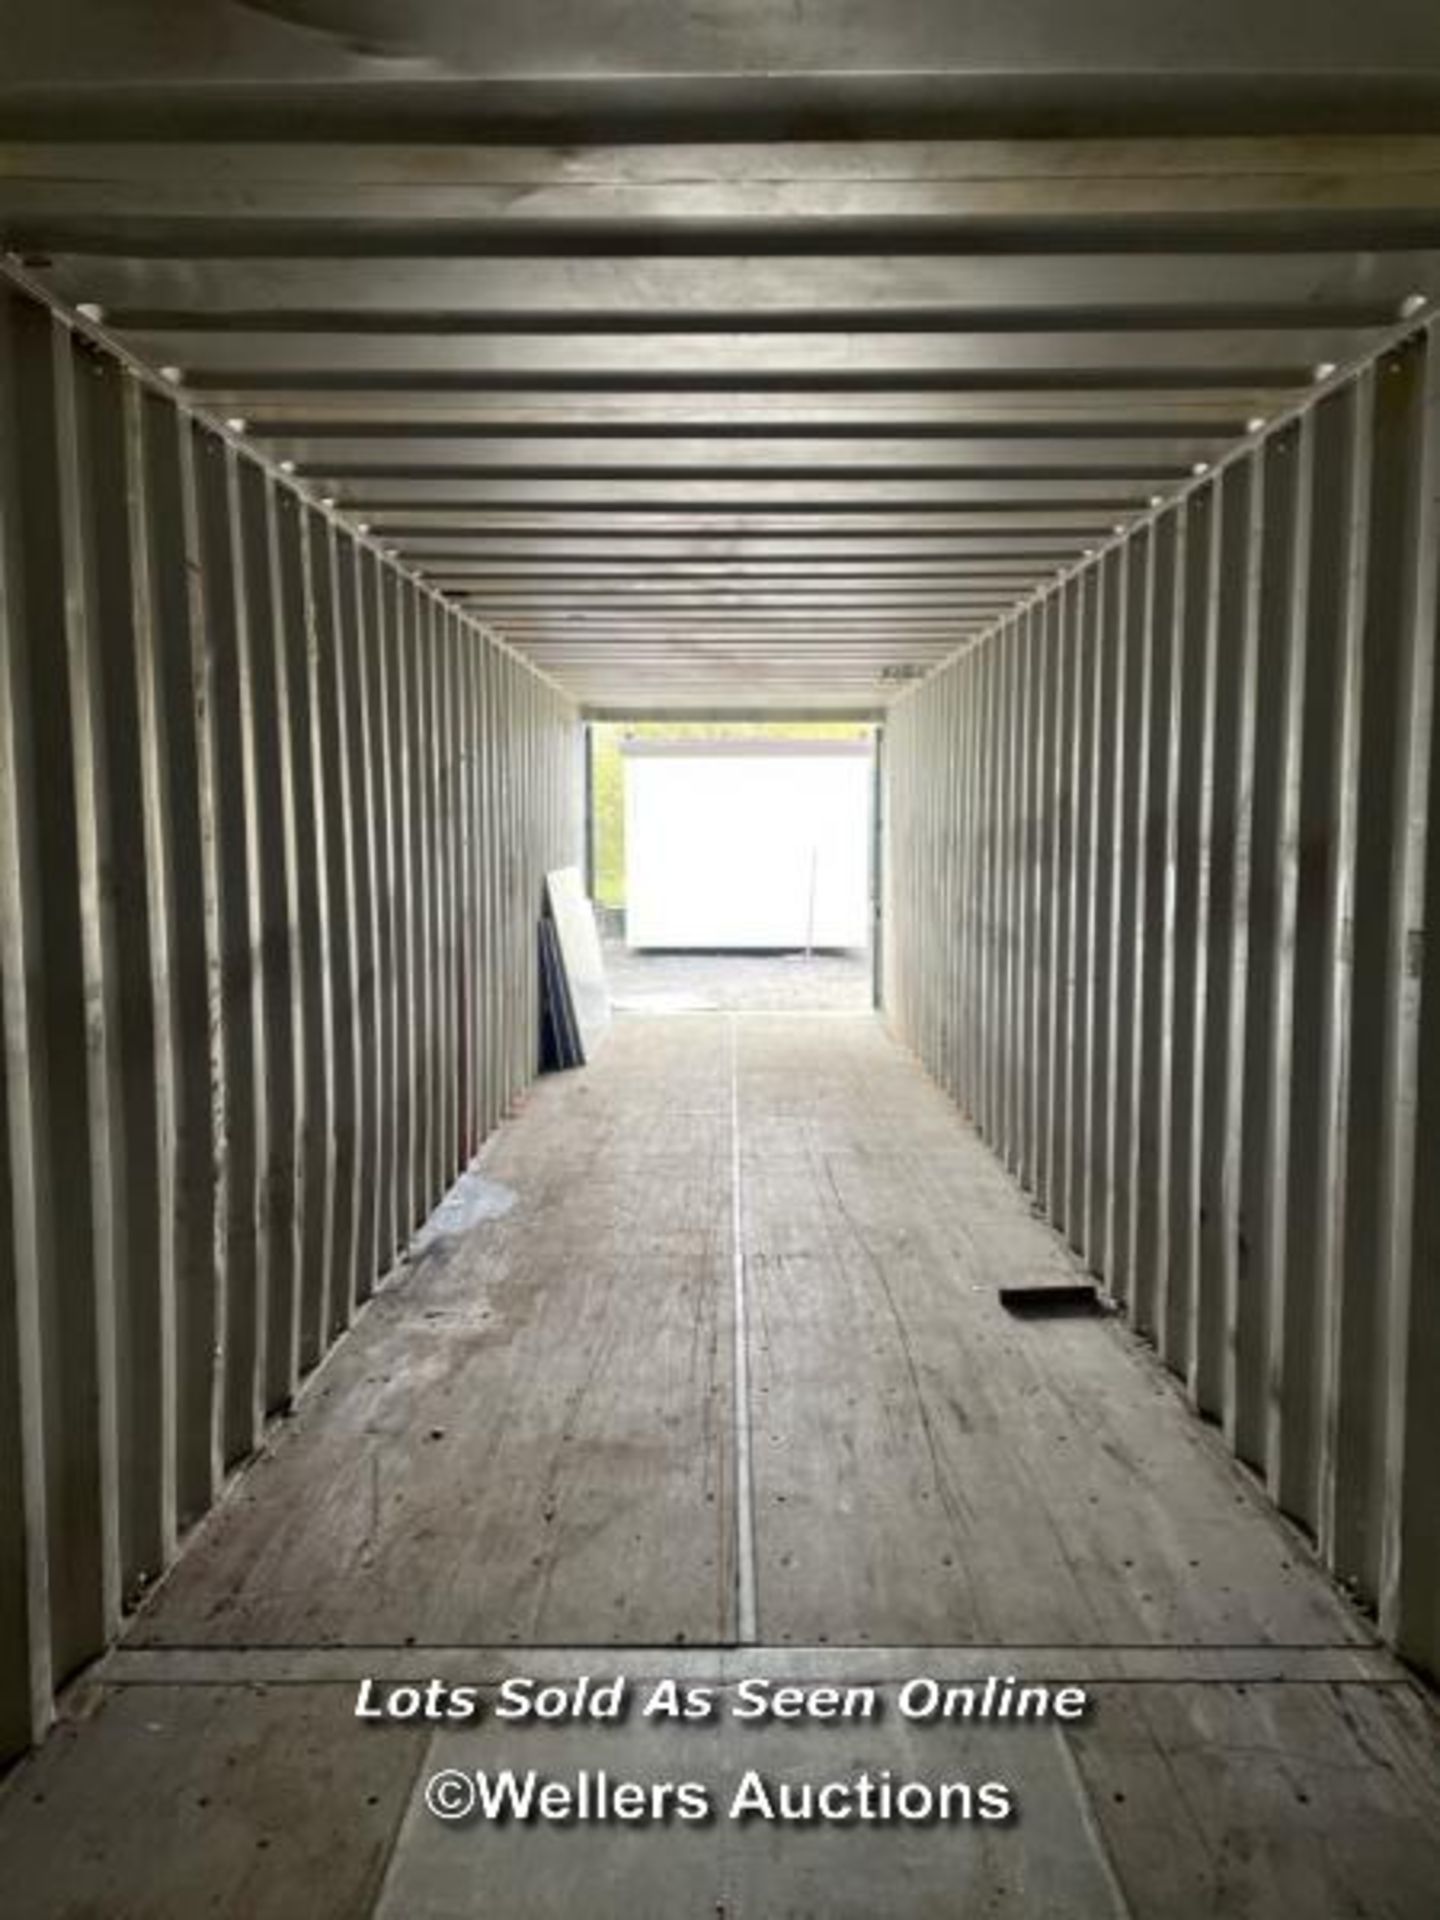 40' X 8' STEEL SHIPPING CONTAINER, 2.65M HIGH - Image 10 of 10